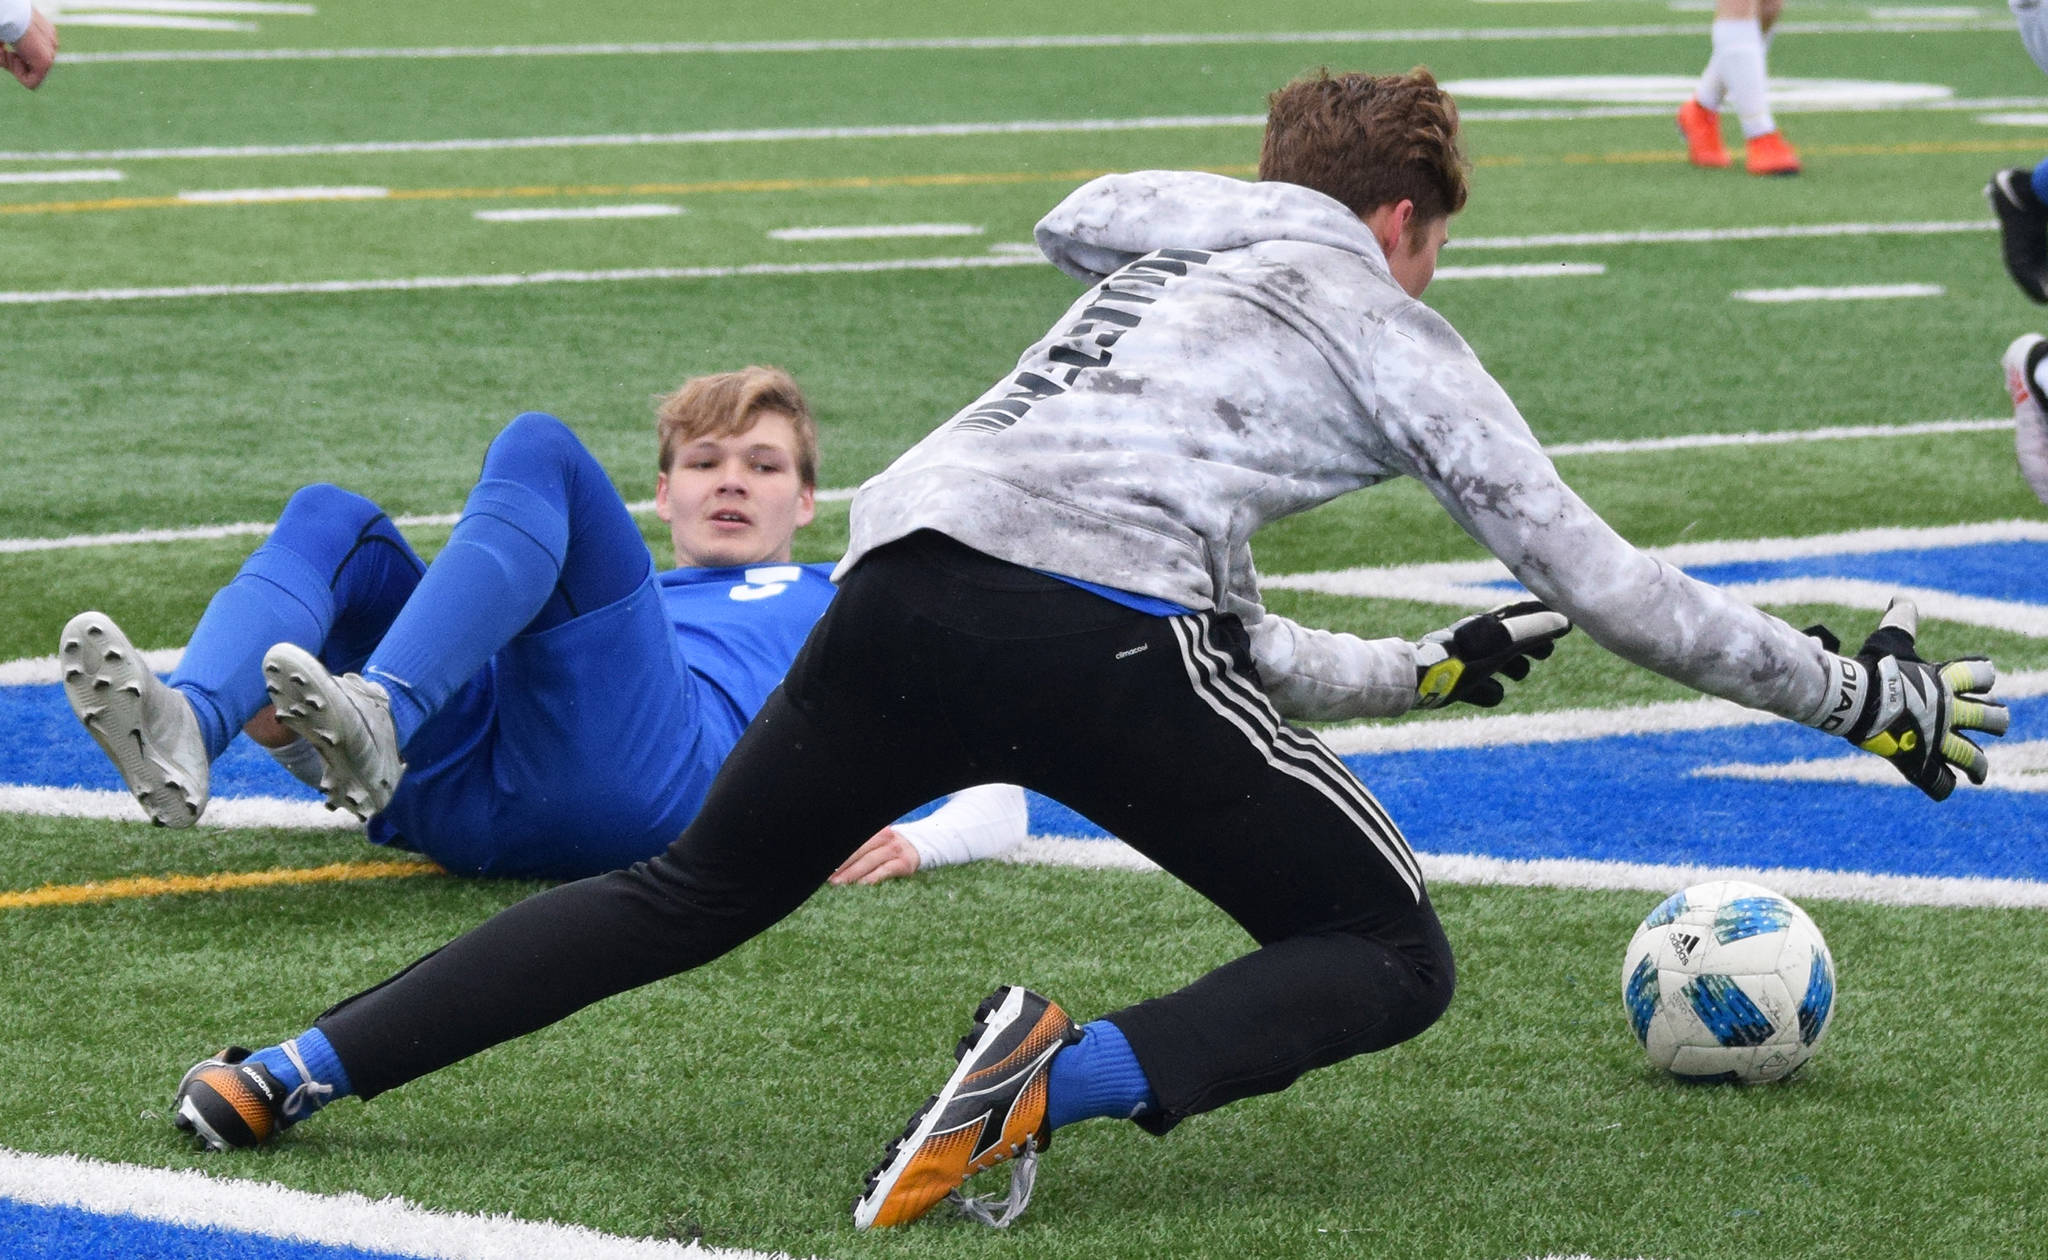 Soldotna’s Rory Nelson watches as SoHi goalkeeper Colton Sorhus (forwar) falls on the ball Saturday against Homer in a Peninsula Conference game in Soldotna. (Photo by Joey Klecka/Peninsula Clarion)